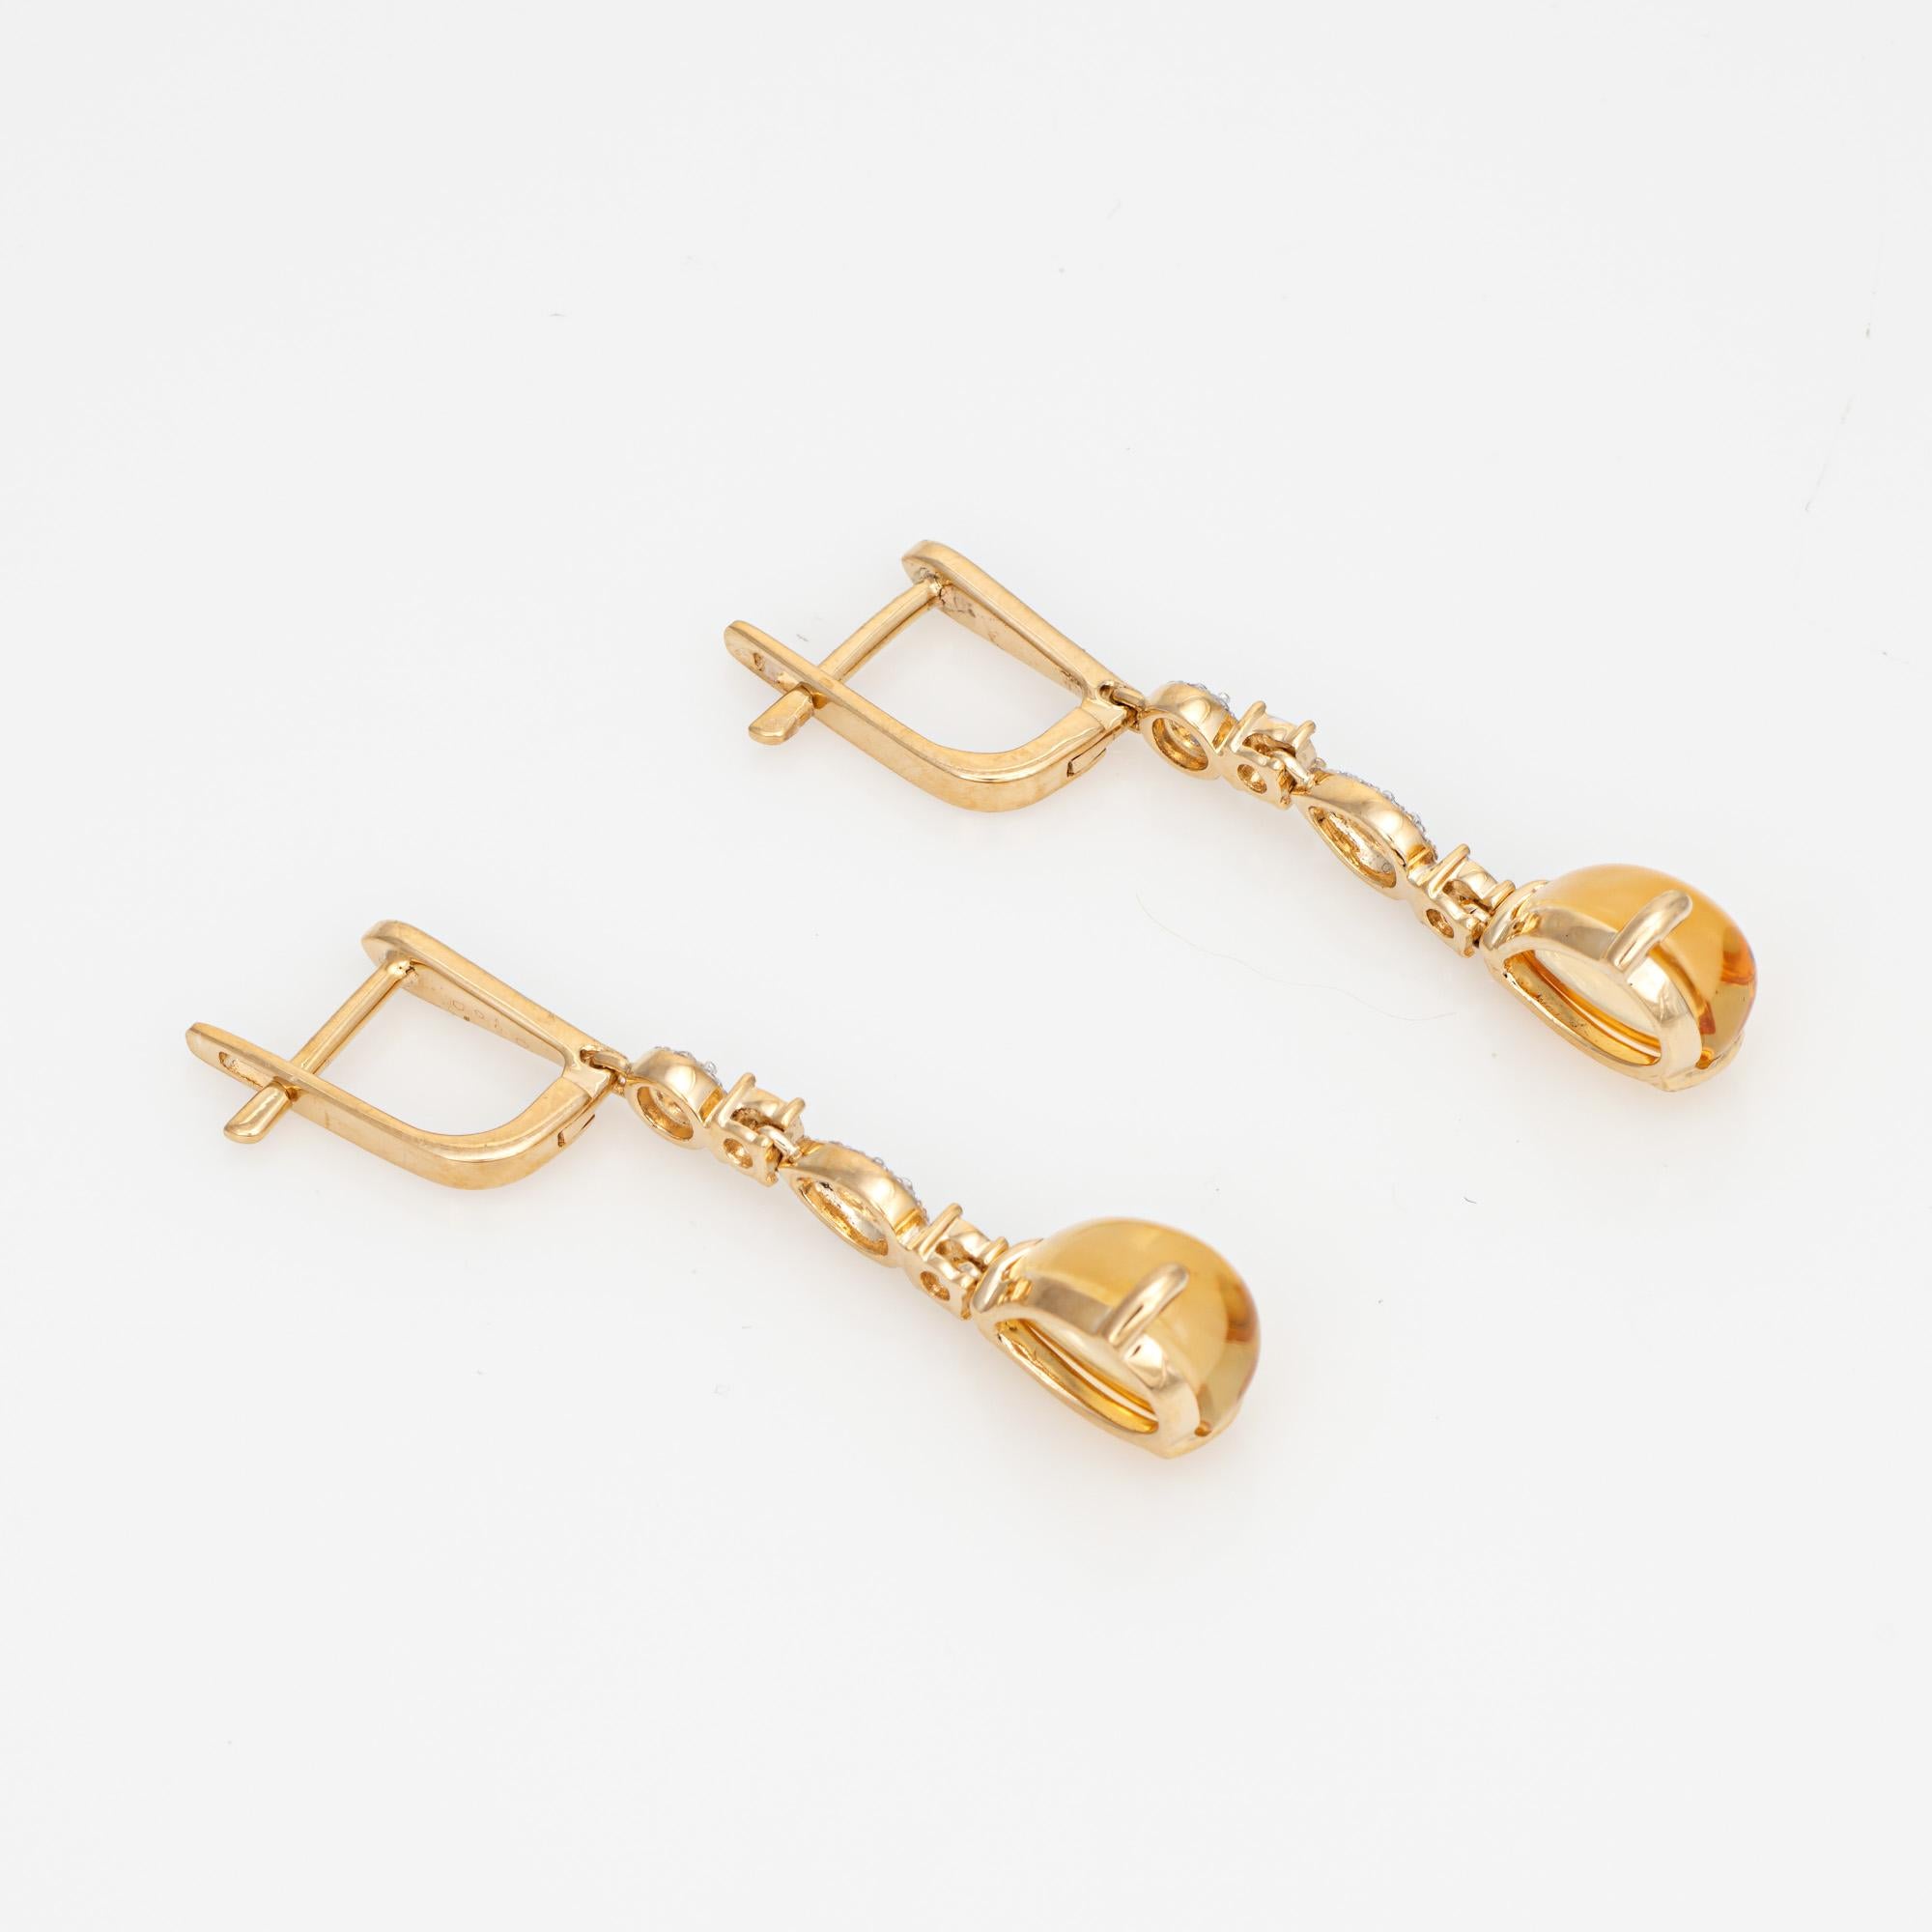 Elegant pair of citrine & diamond drop earrings, crafted in 14k yellow gold. 

Pear cut citrine cabochons are estimated at 2 carats each, accented with an estimated 0.10 carats of diamonds (estimated at H-I color and VS2-SI2 clarity). The citrines